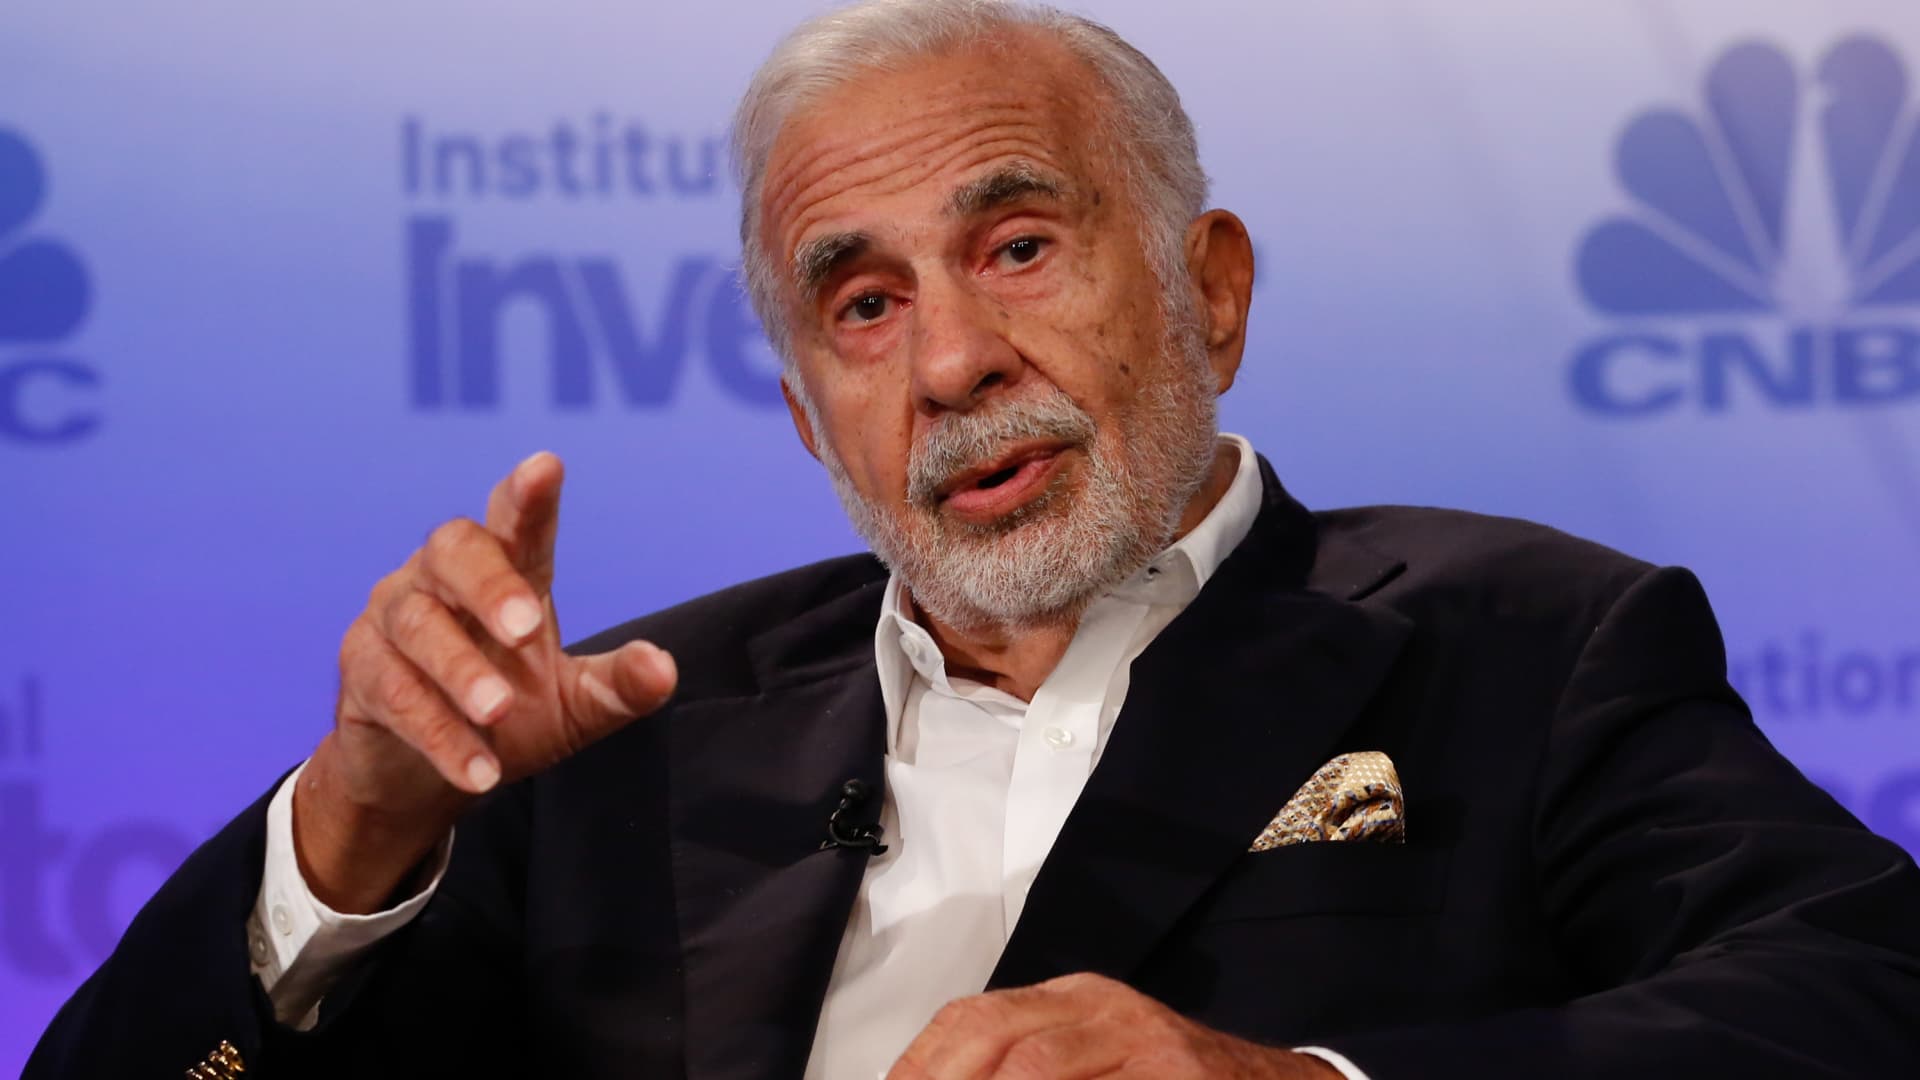 Carl Icahn blasts Illumina for nearly doubling CEO’s pay despite steep drop in market value